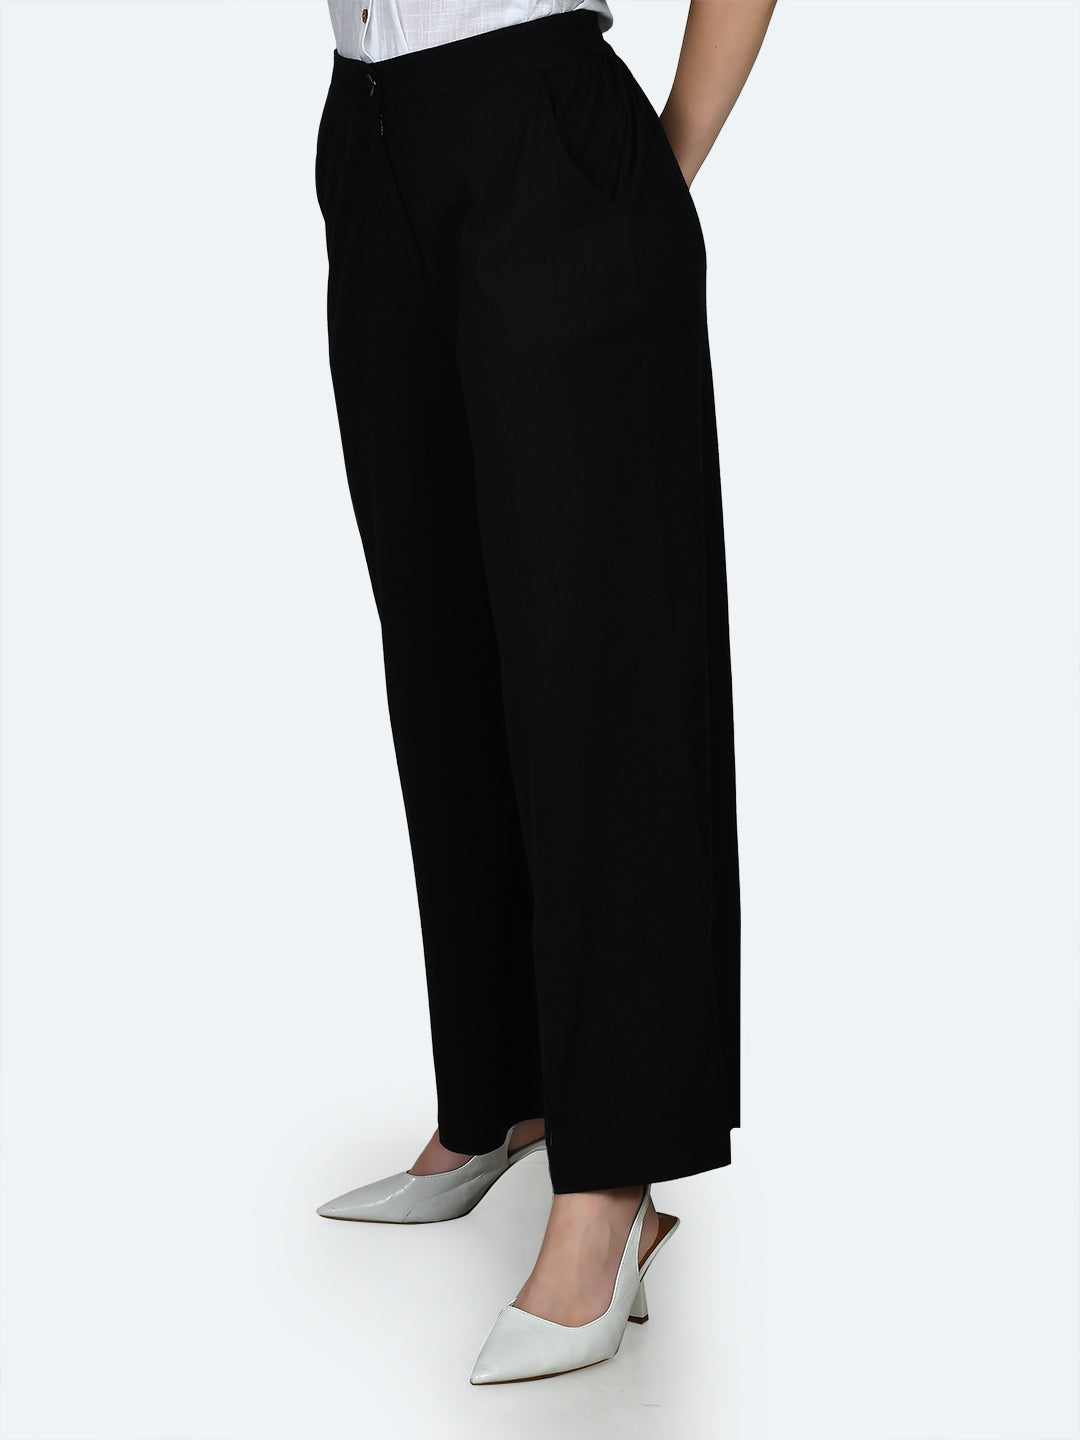 Black Solid Wide Leg Trousers For Women